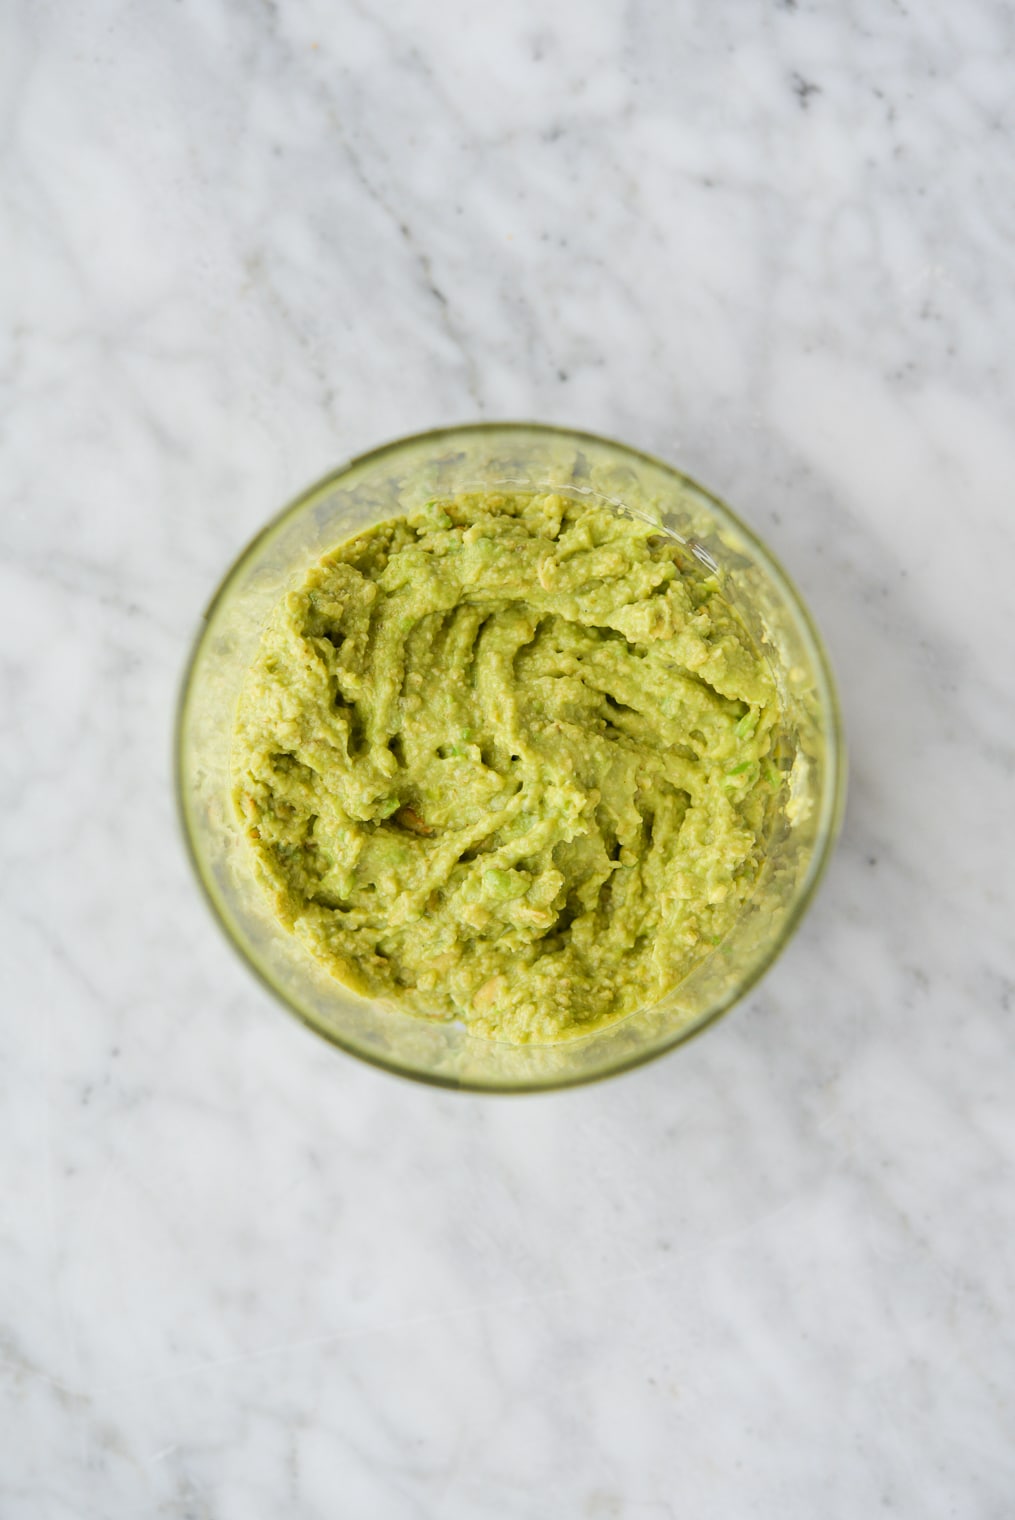 mashed avocado and oatmeal soothing face mask in a glass jar on a marble surface